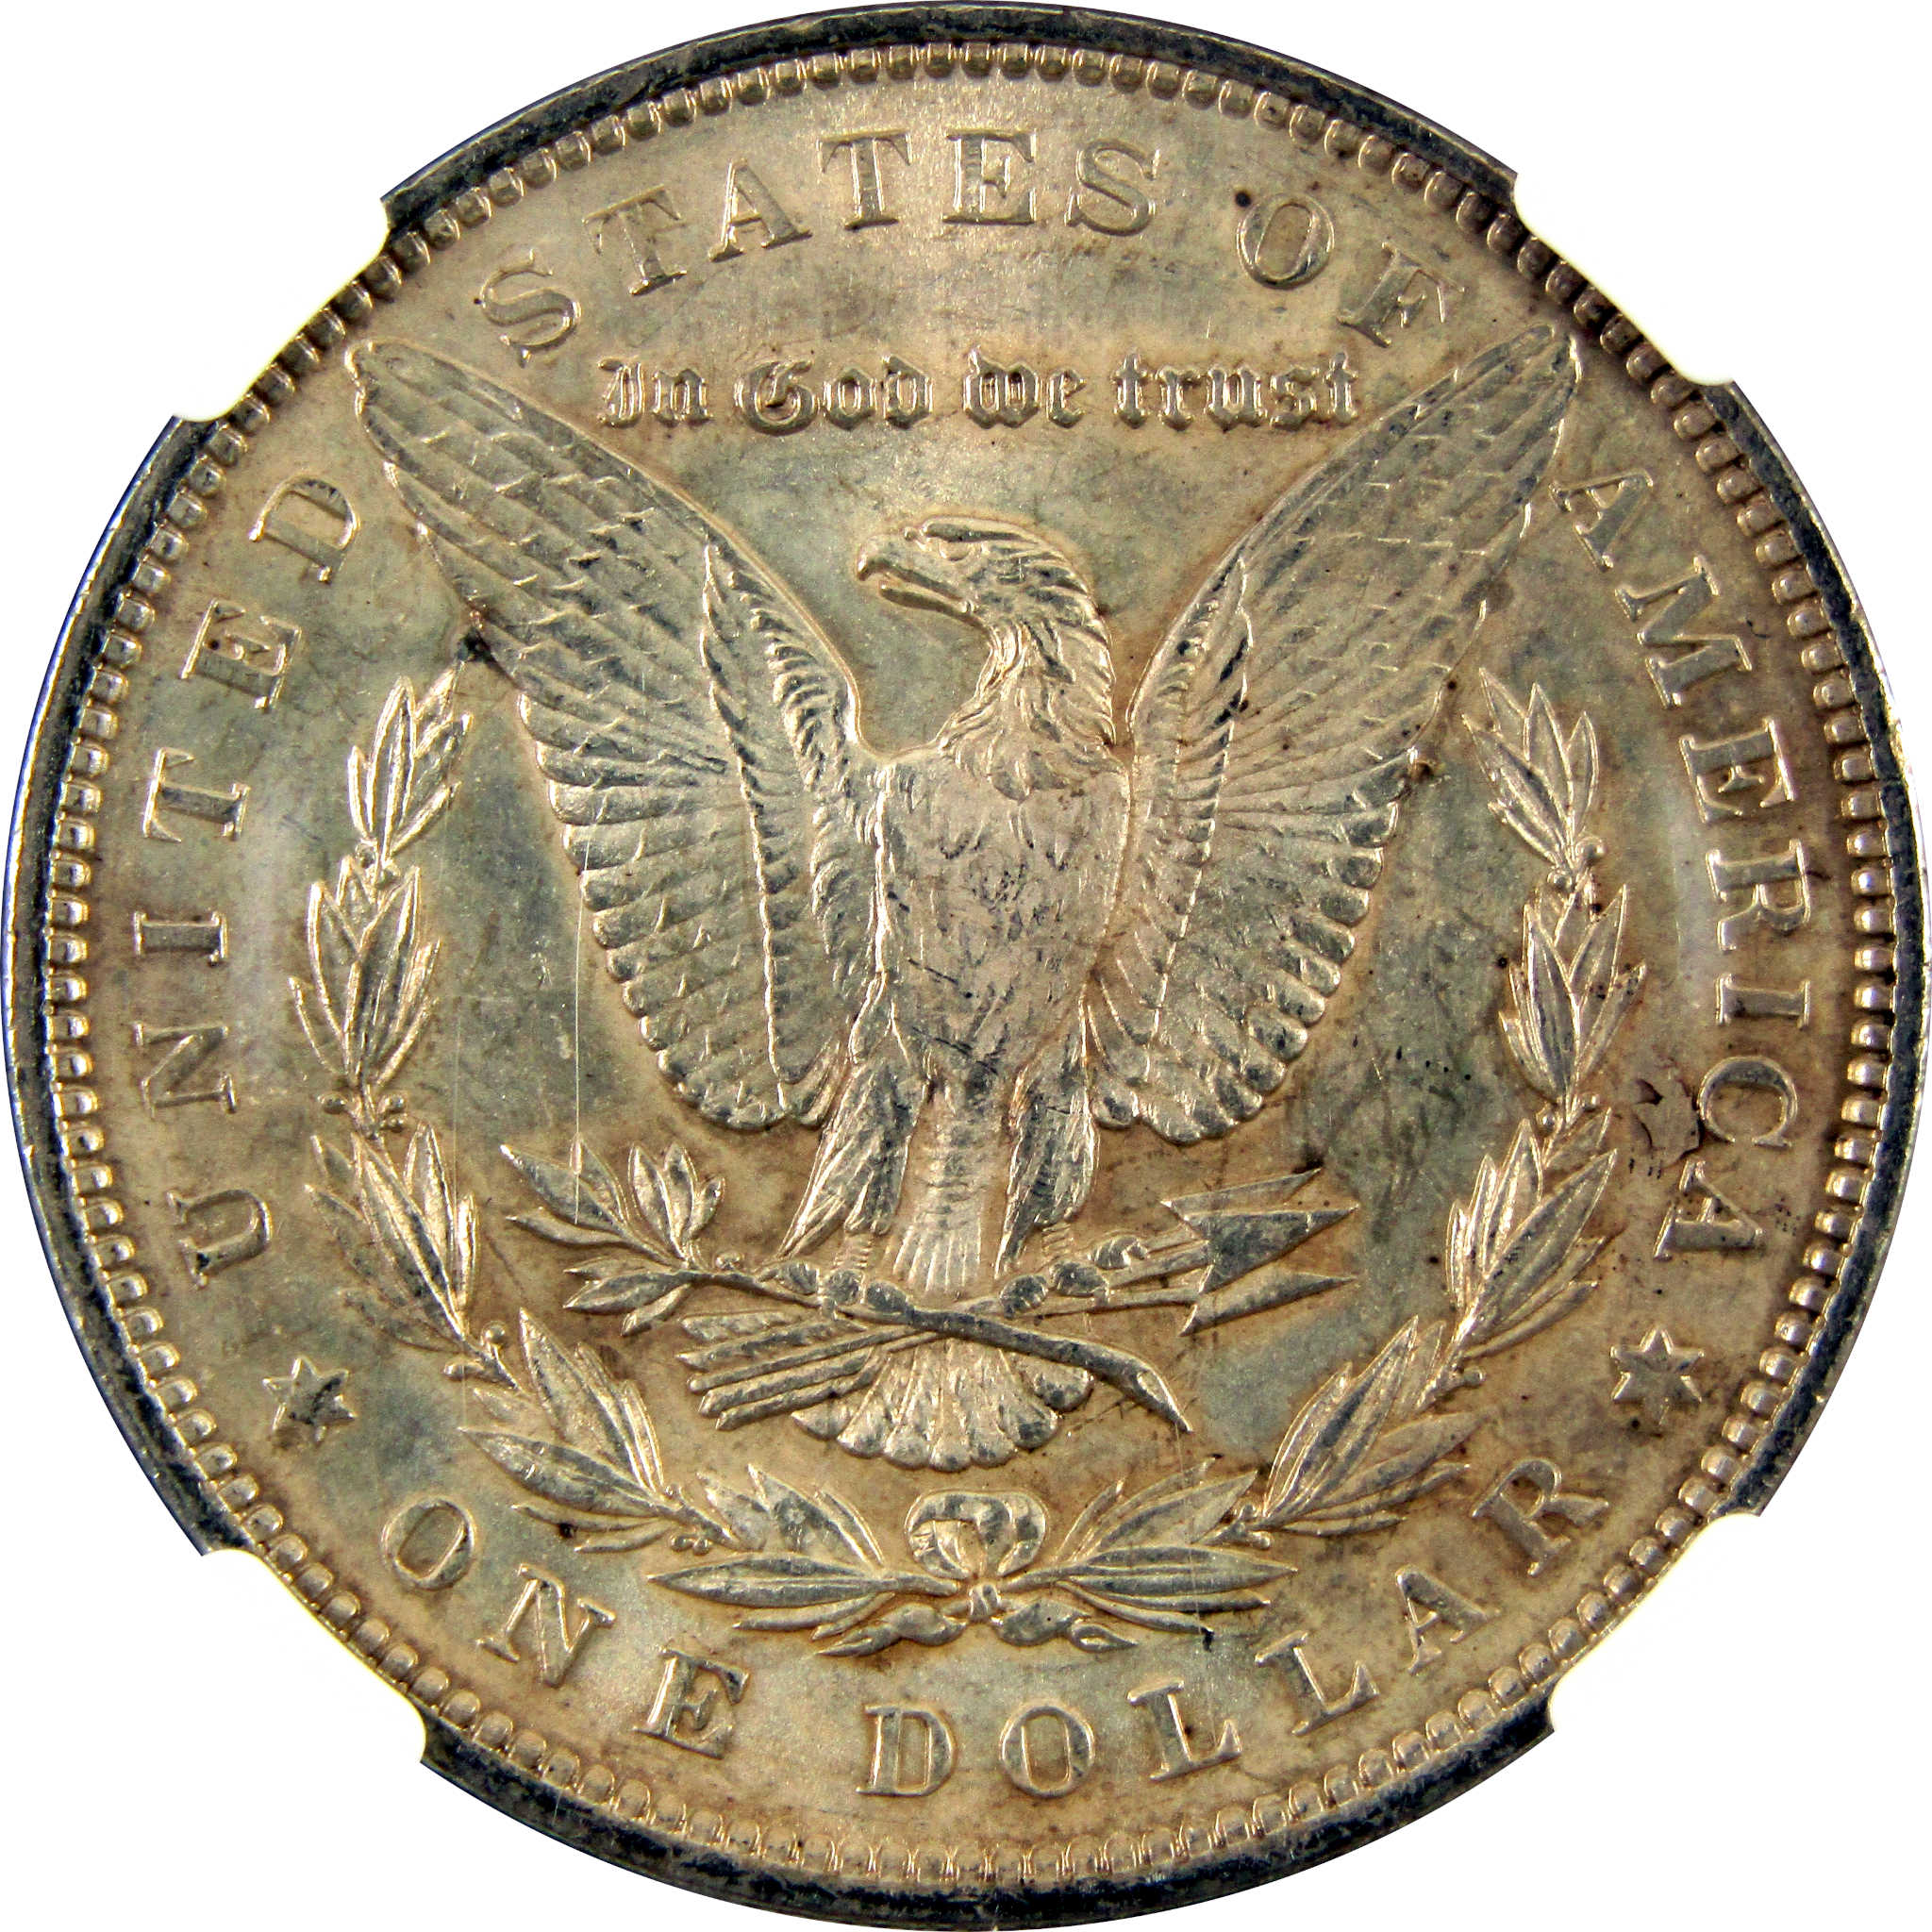 1892 Morgan Dollar MS 62 NGC Silver $1 Uncirculated Coin SKU:I10927 - Morgan coin - Morgan silver dollar - Morgan silver dollar for sale - Profile Coins &amp; Collectibles